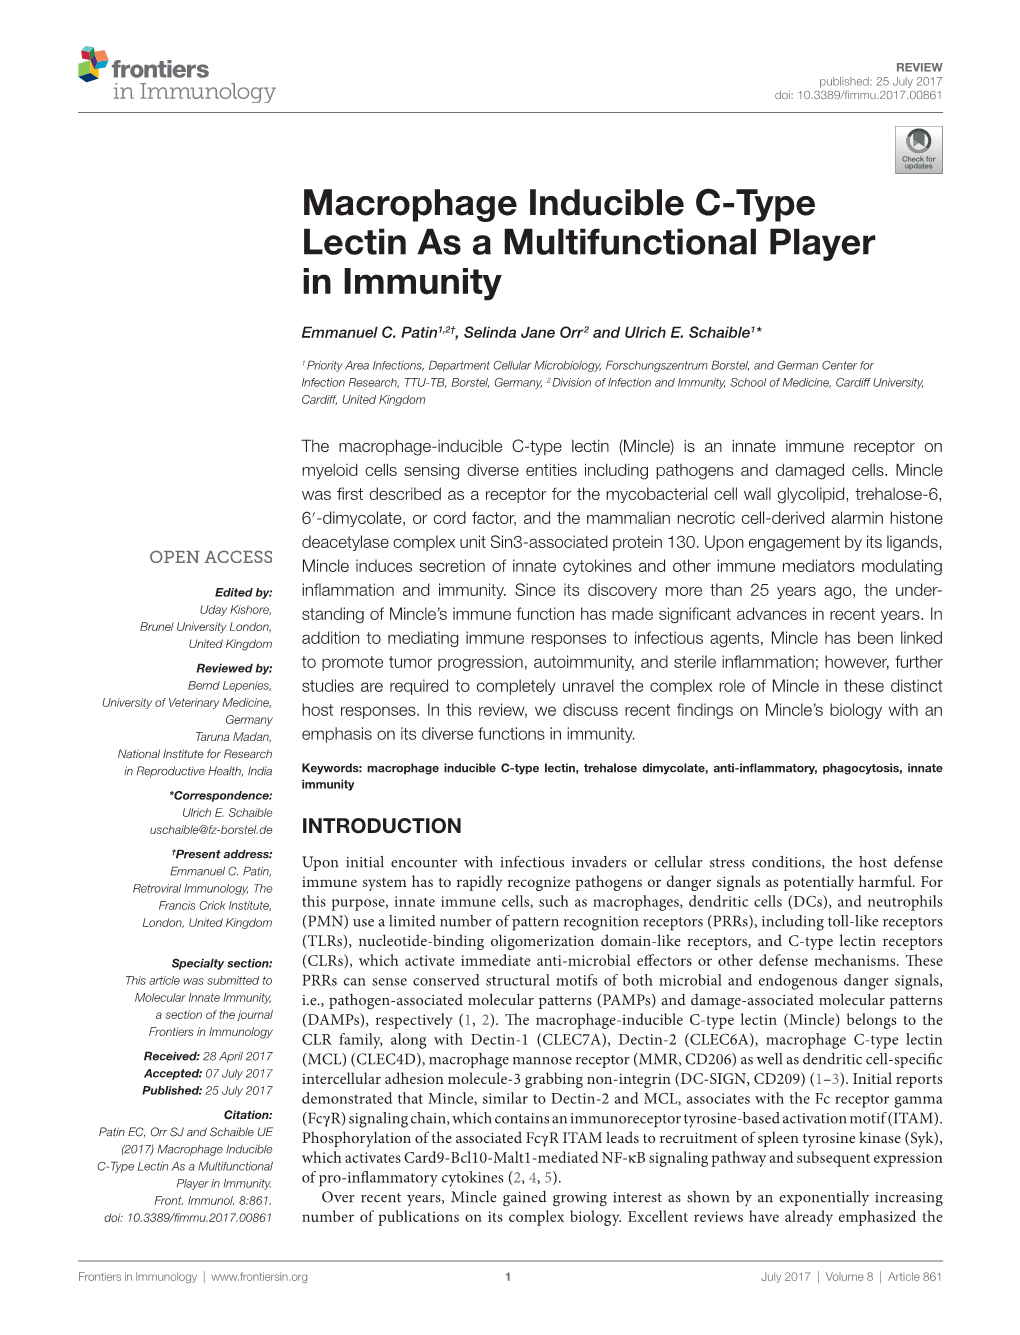 Macrophage Inducible C-Type Lectin As a Multifunctional Player in Immunity